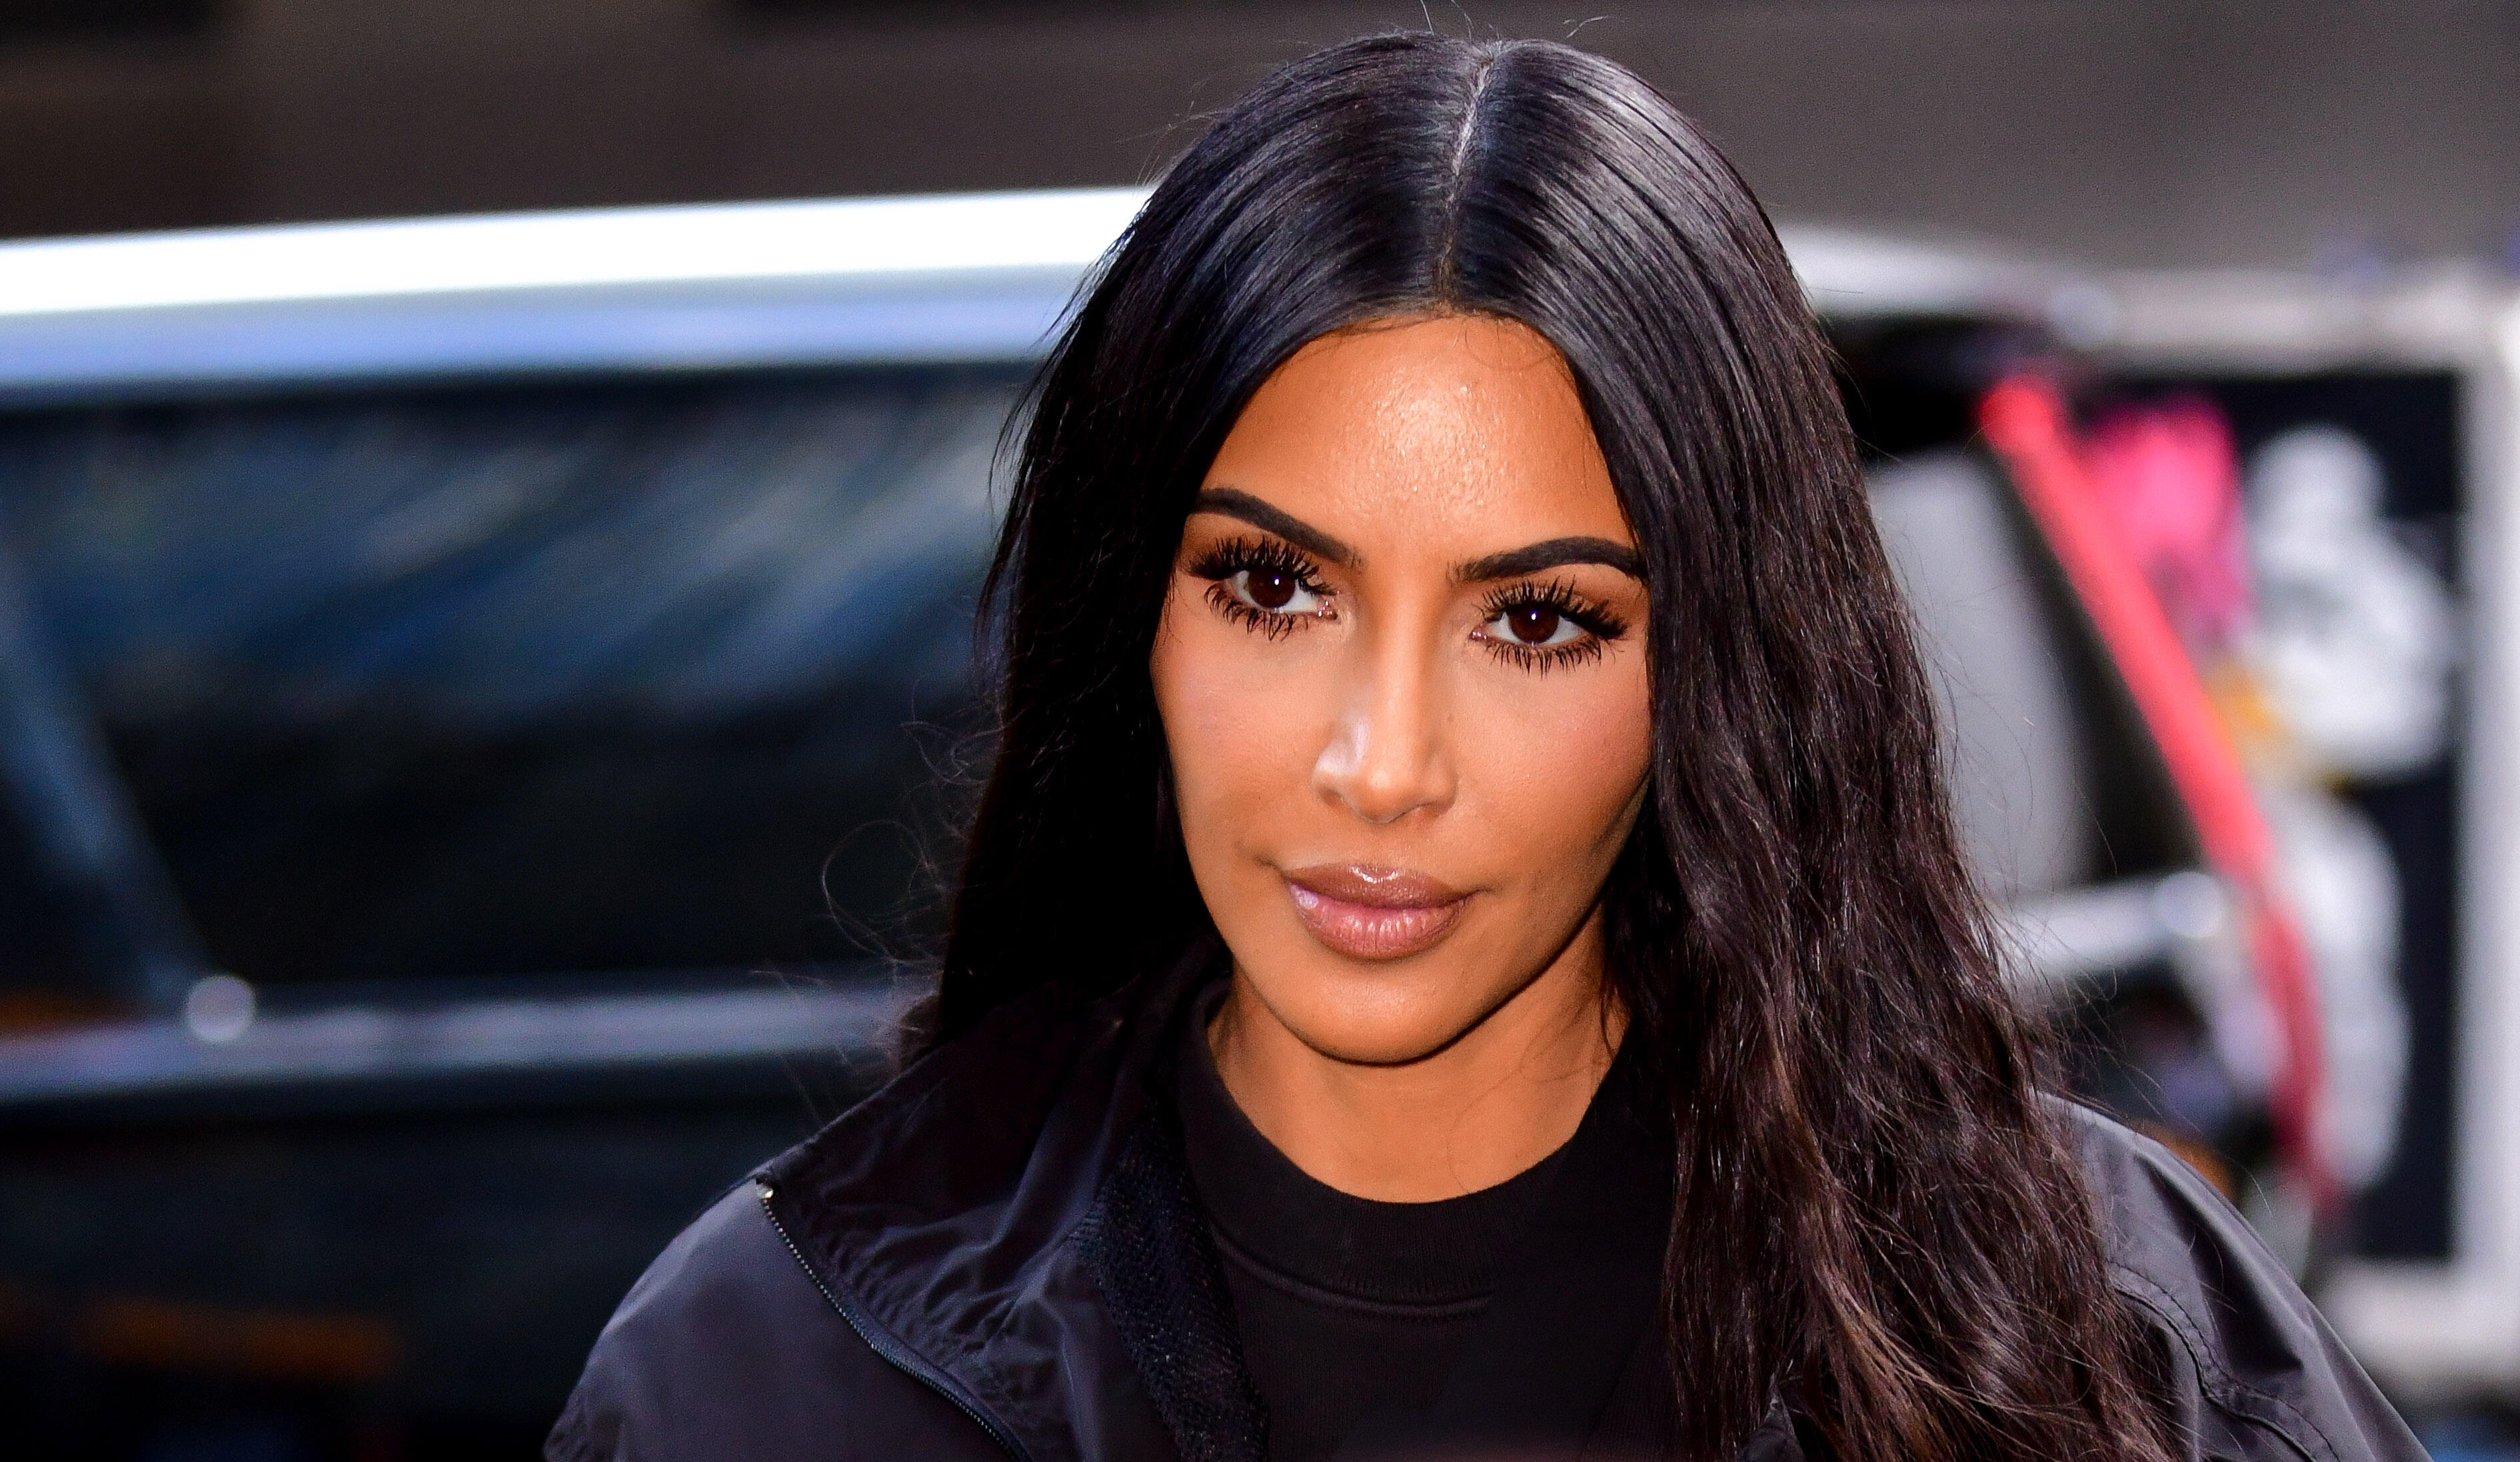 Kim Kardashian defends SKIMS maternity line after backlash, saying it's for  support, not to slim